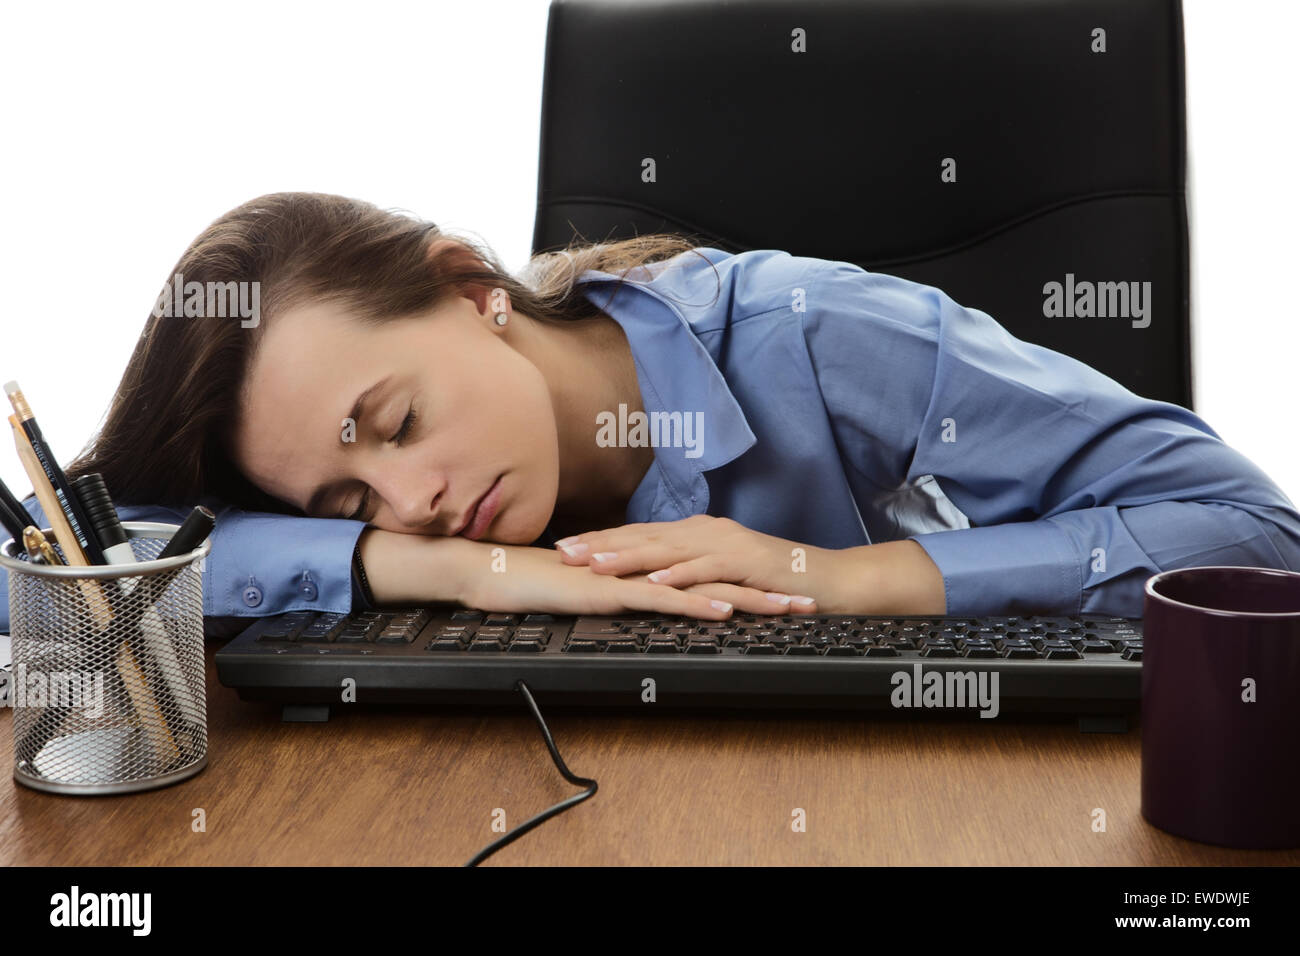 Business Woman Asleep On Her Desk At Work Stock Photo 84513366